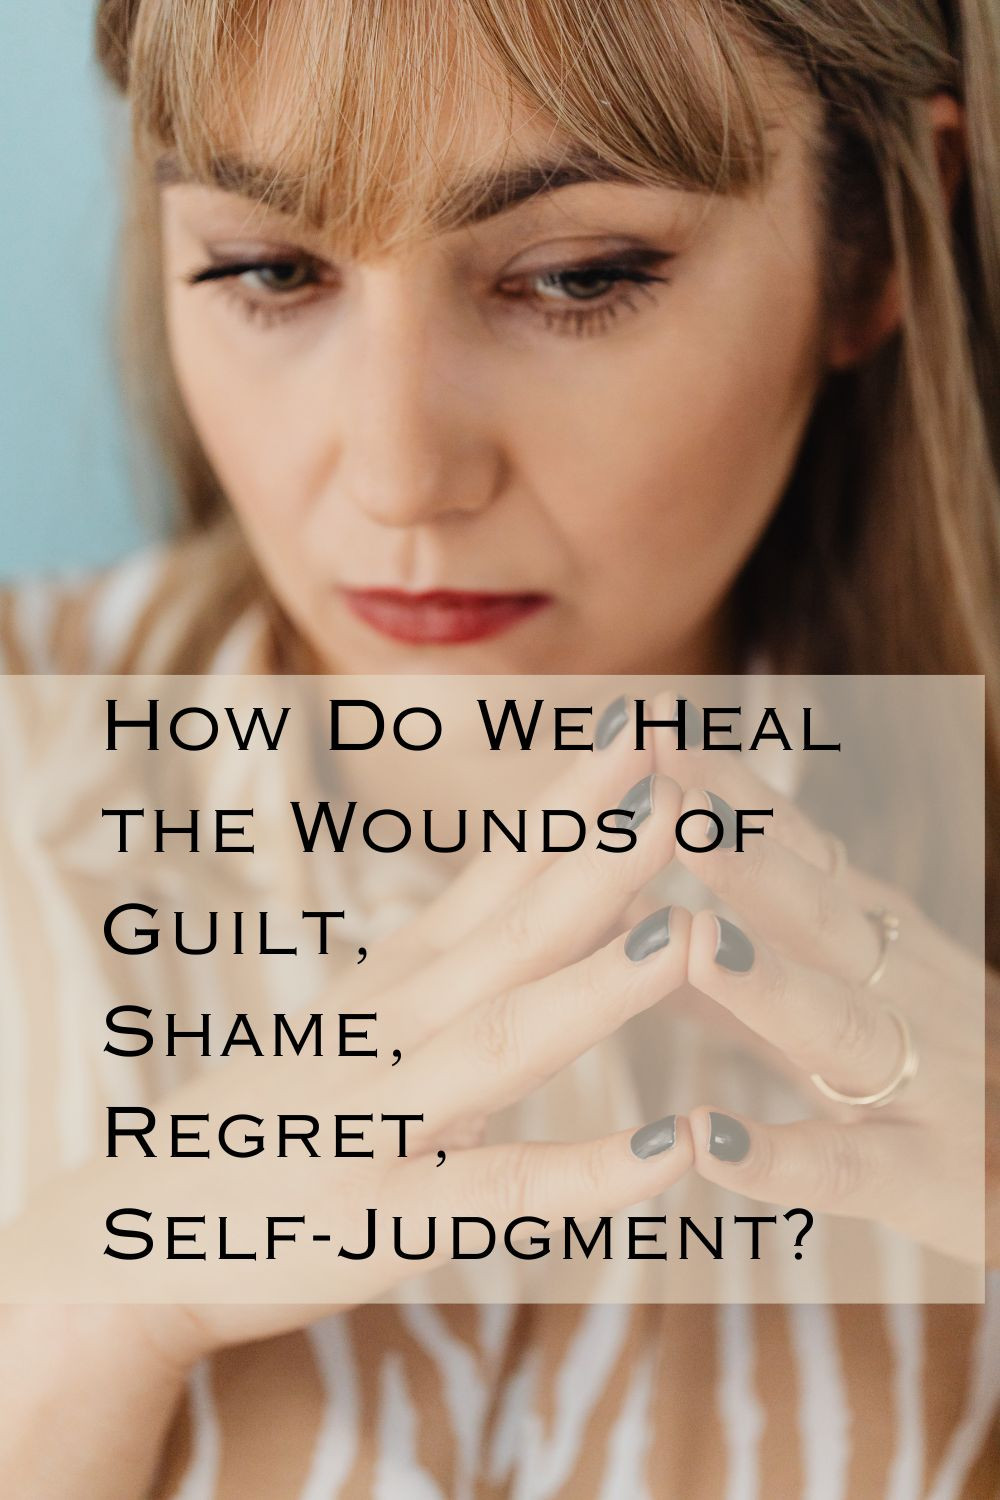  How Do We Heal the Wounds of Guilt, Shame, Regret, and Self-Judgment?